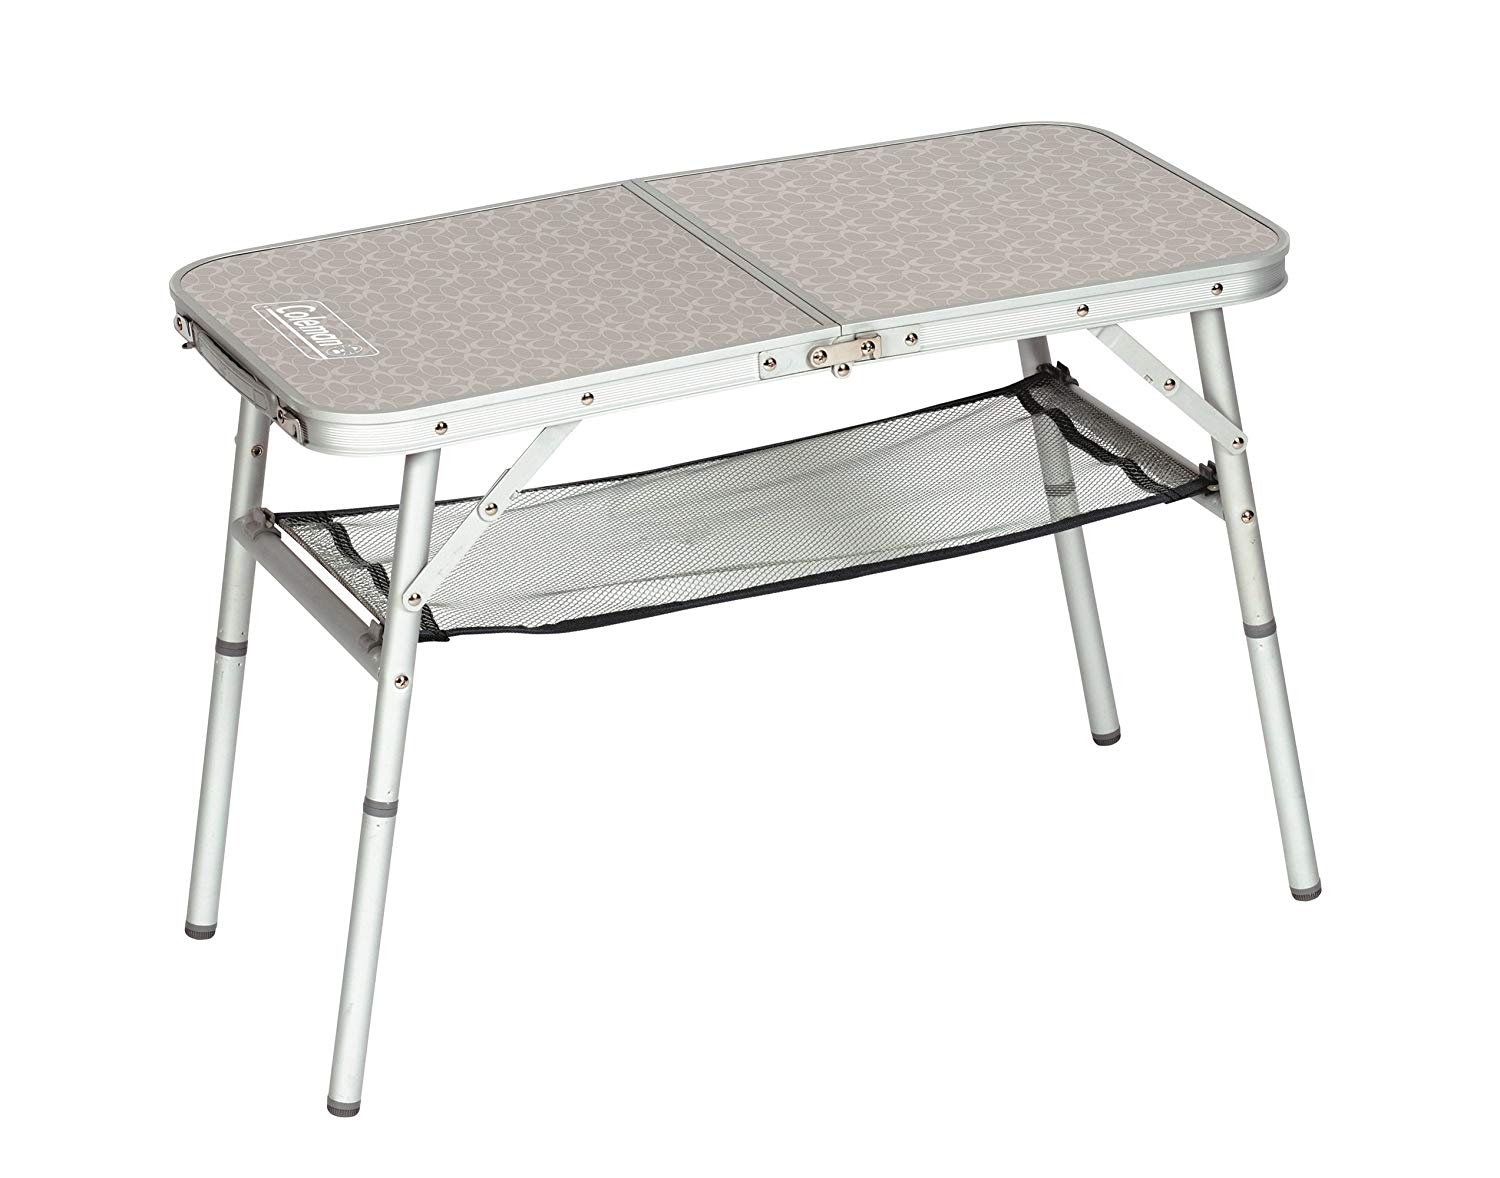 Ourdoor value coleman mini folding camping table lightweight compact